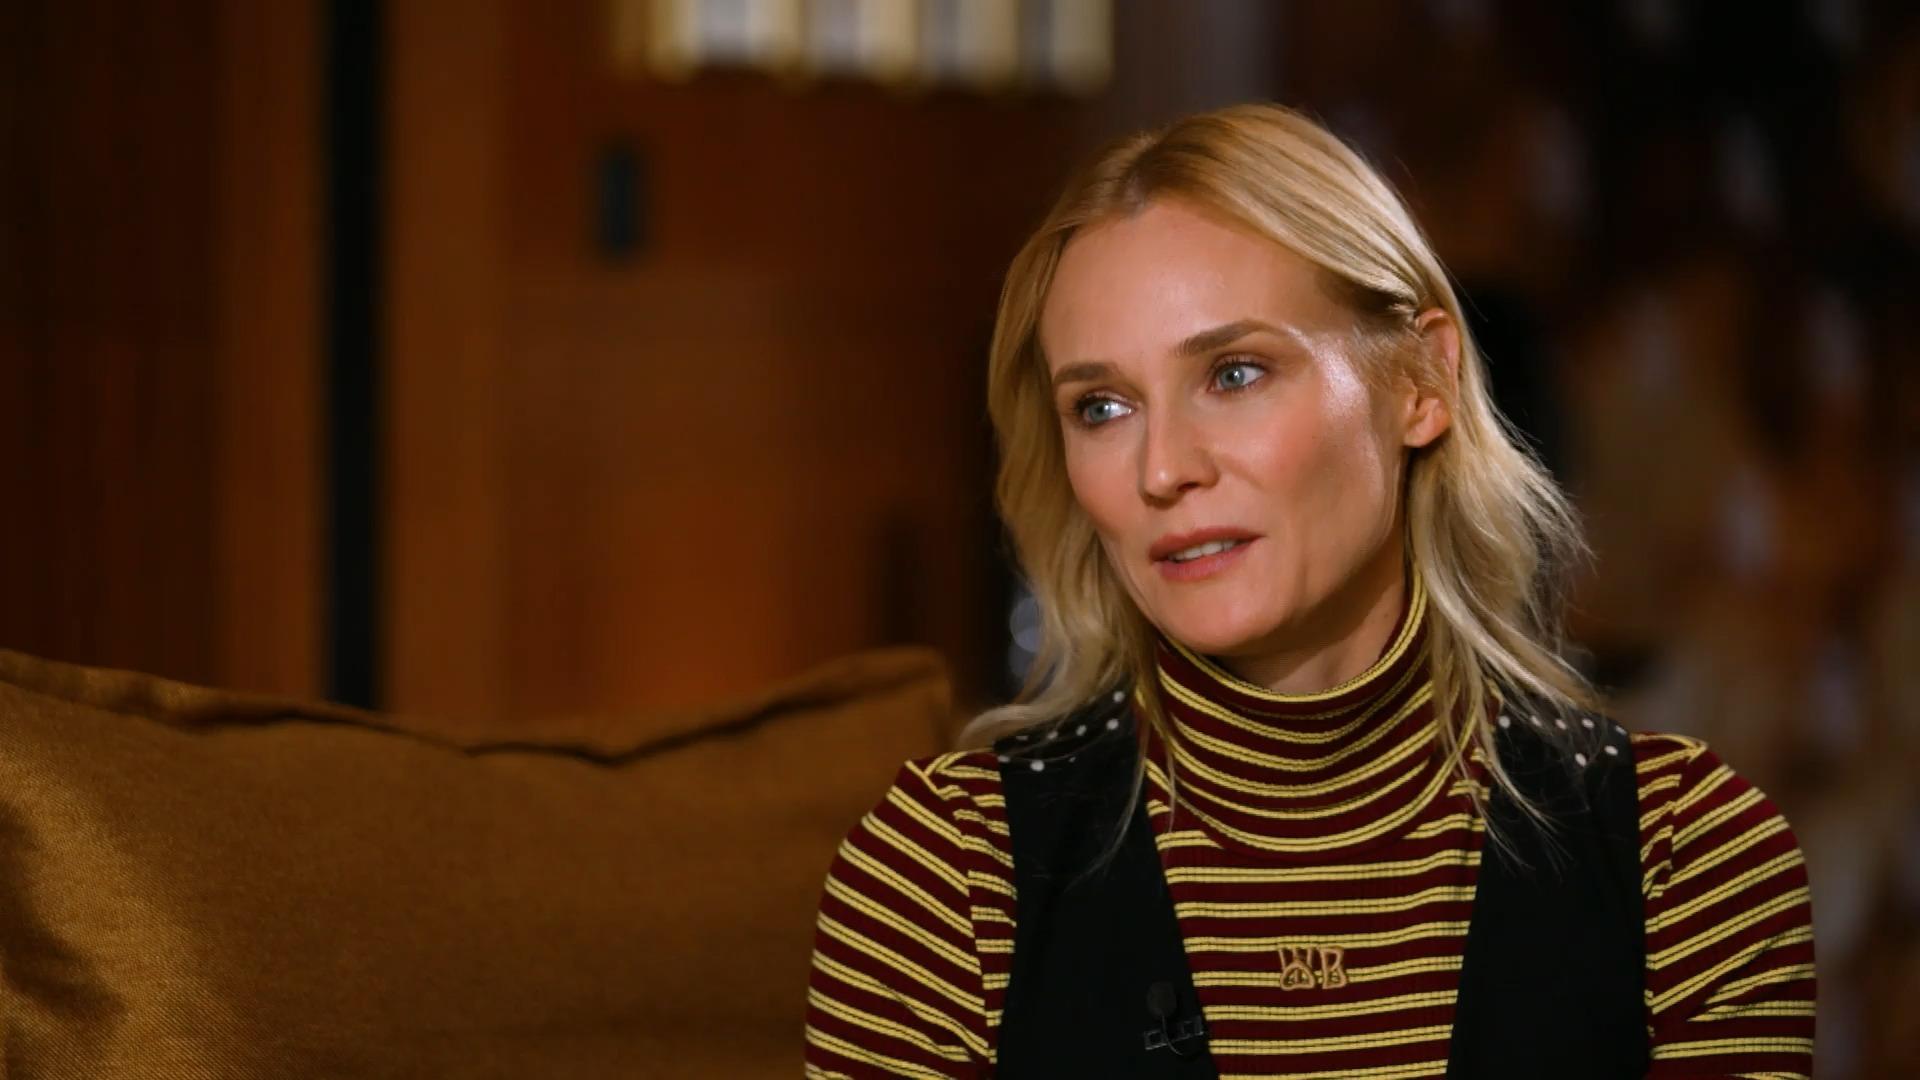 Diane Kruger on family routine with her daughter In the talk at GALA